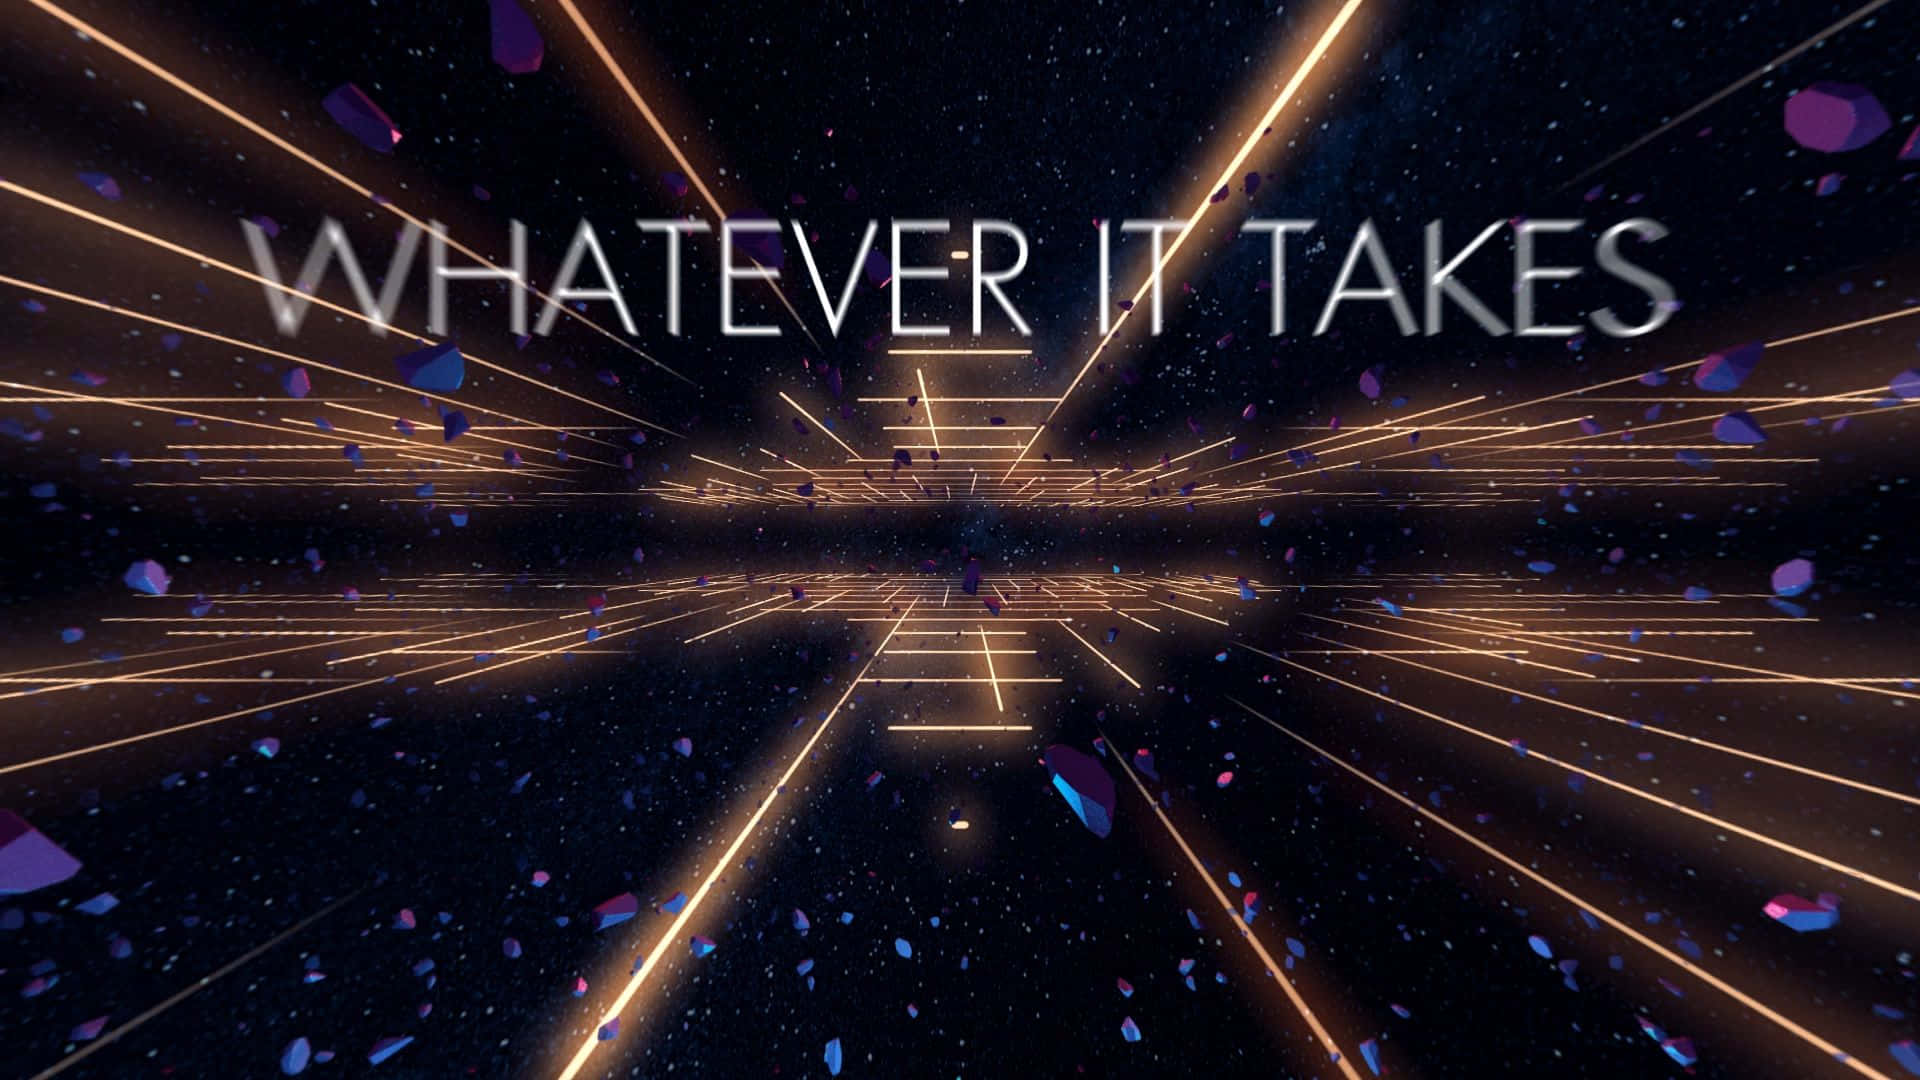 Whatever It Takes - A Space With A Neon Light Background